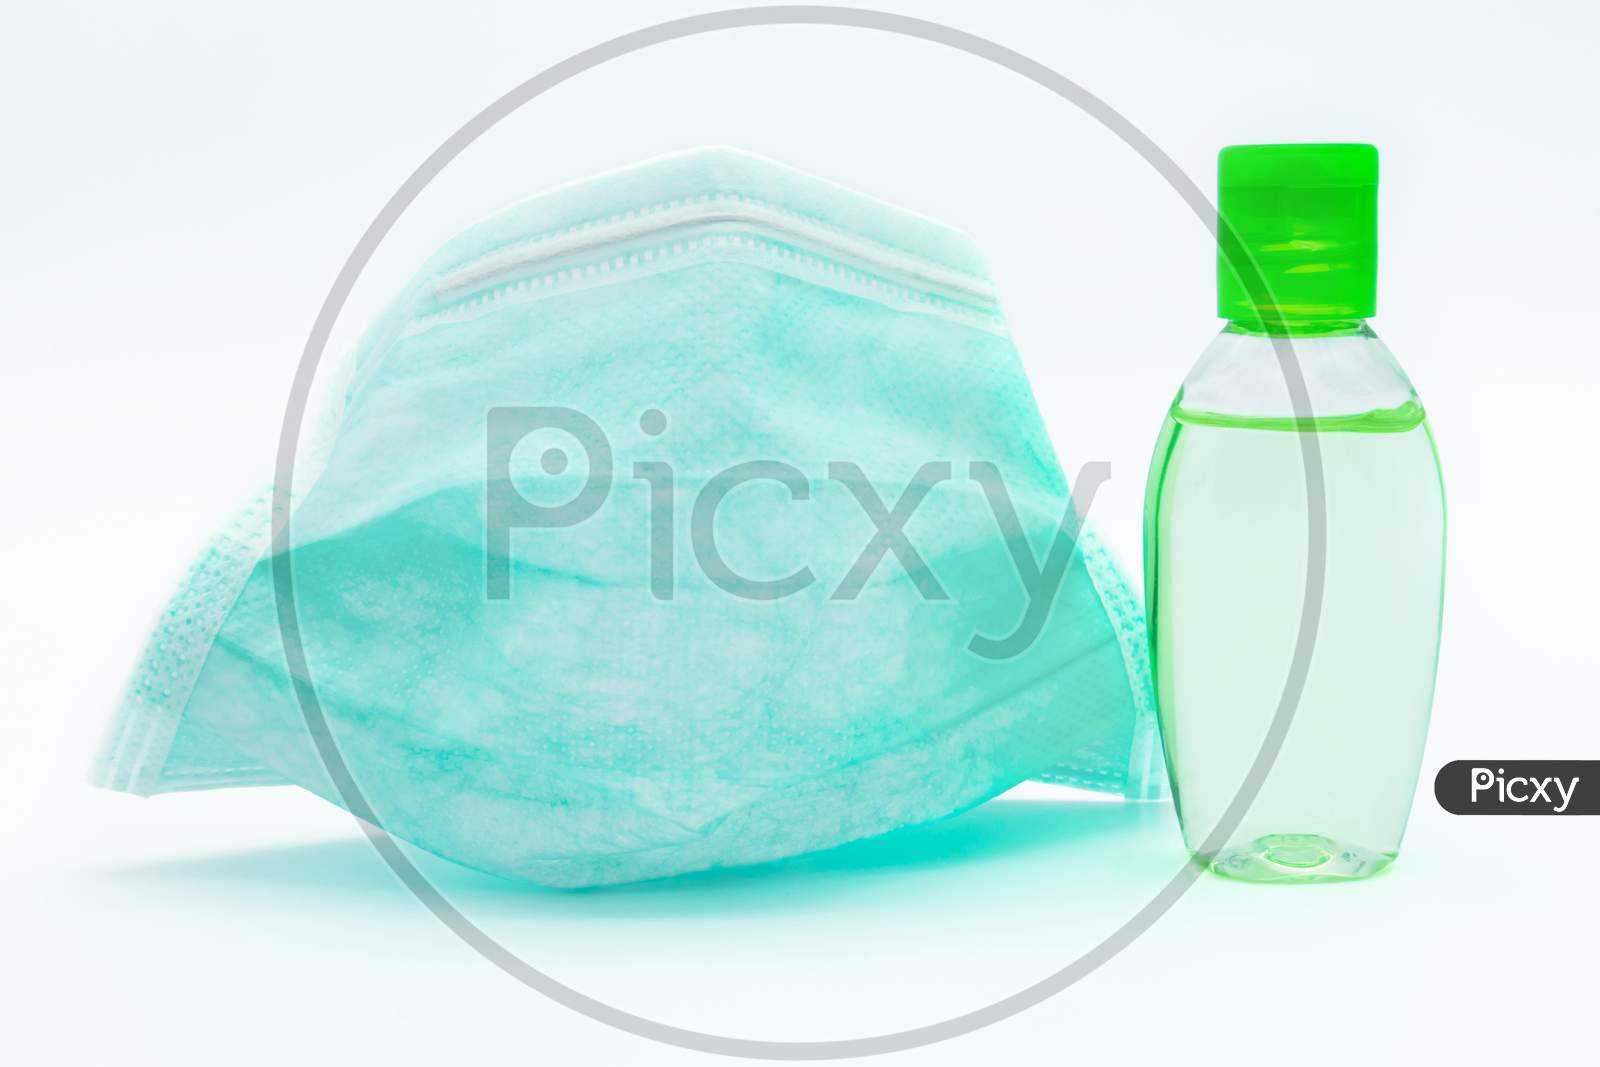 Surgical Face Mask And Bottle Of Hand Sanitizer Are Isolated On White Background